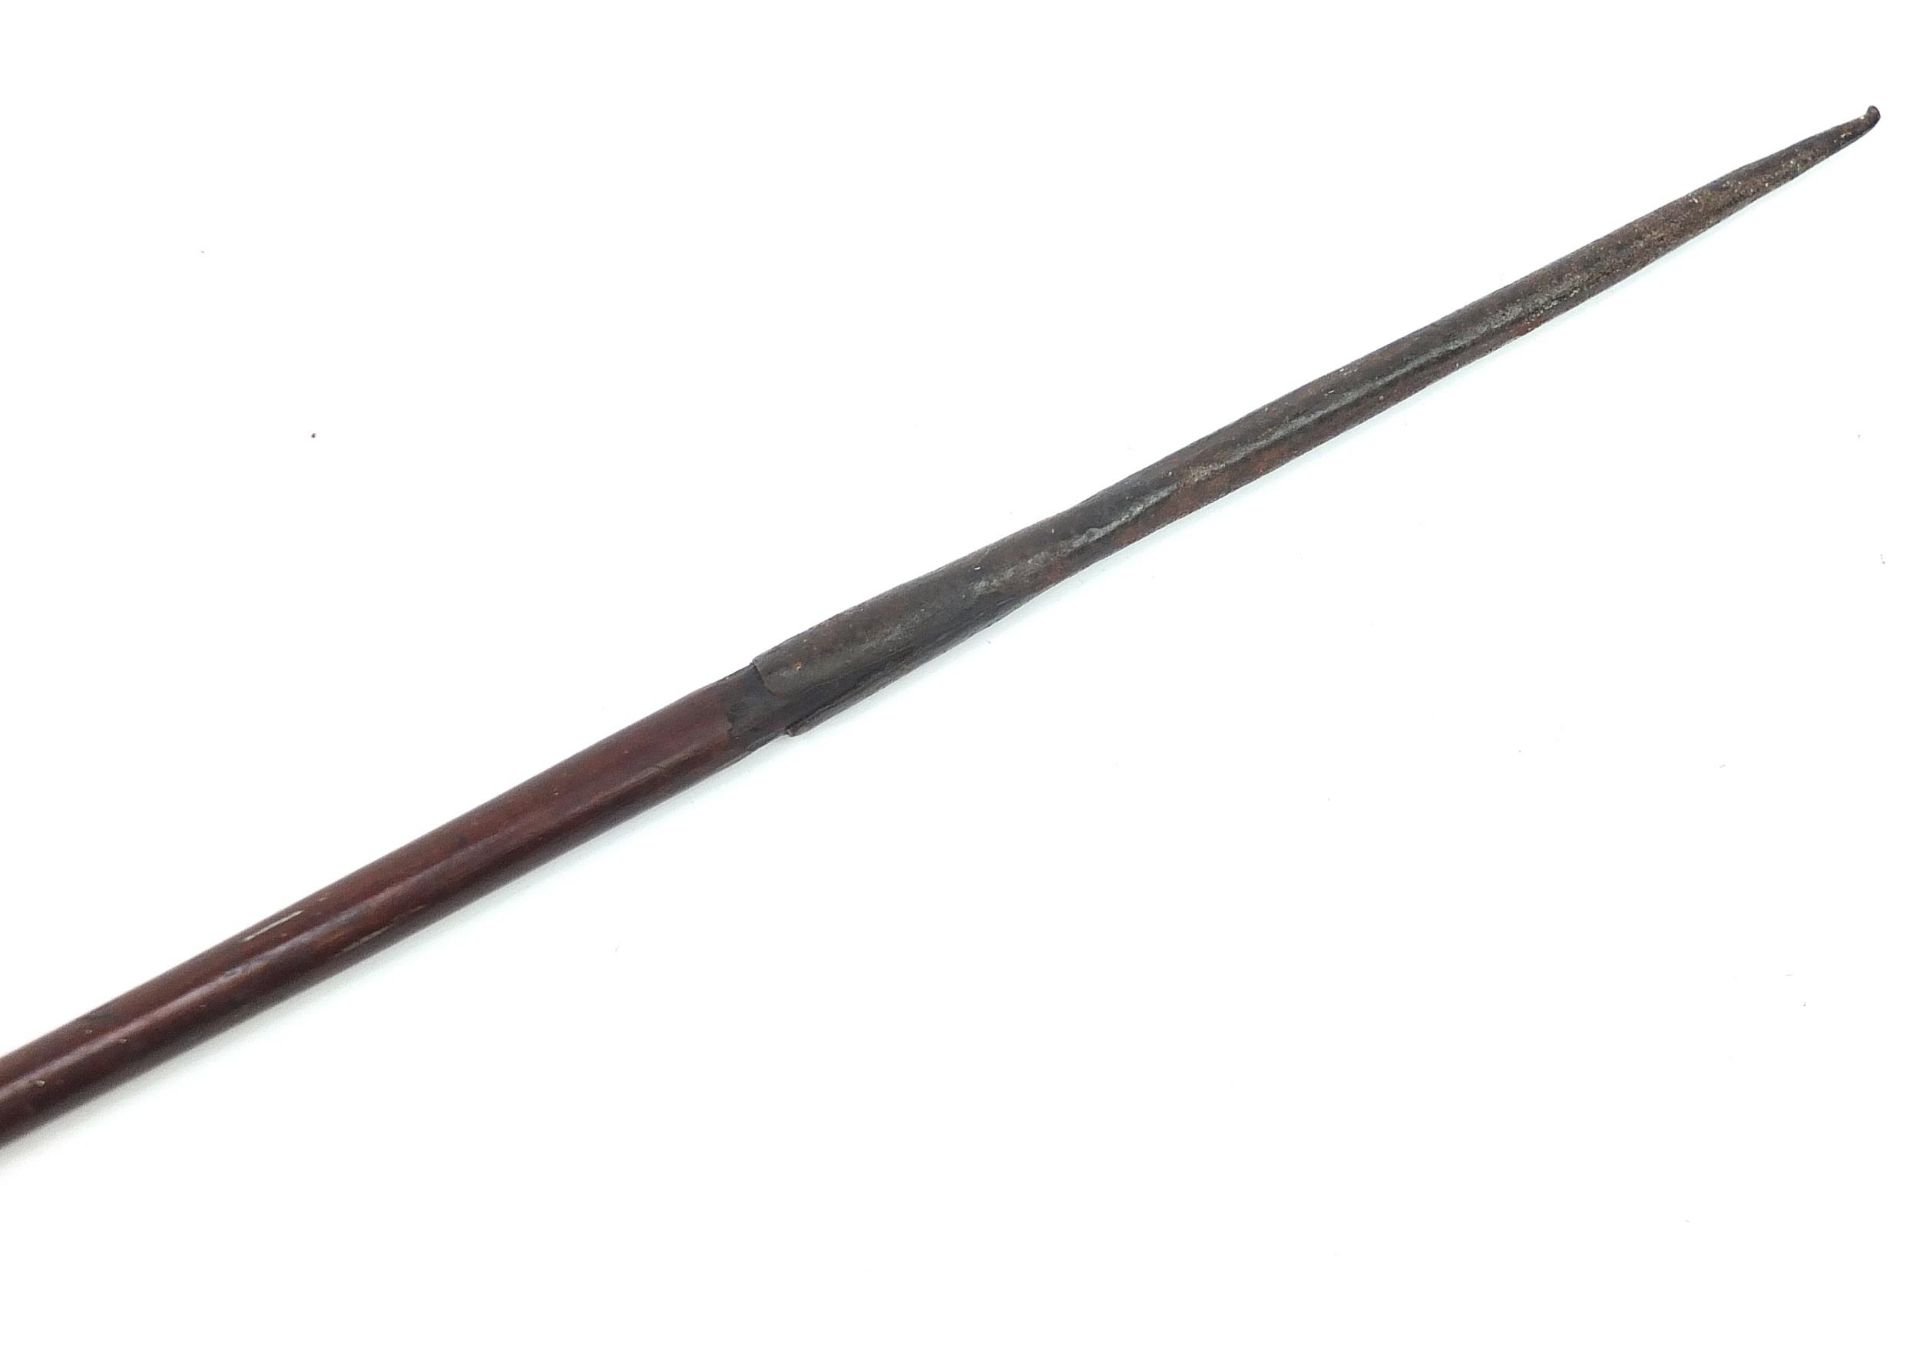 Tribal interest double ended spear, 154cm in length - Image 5 of 6